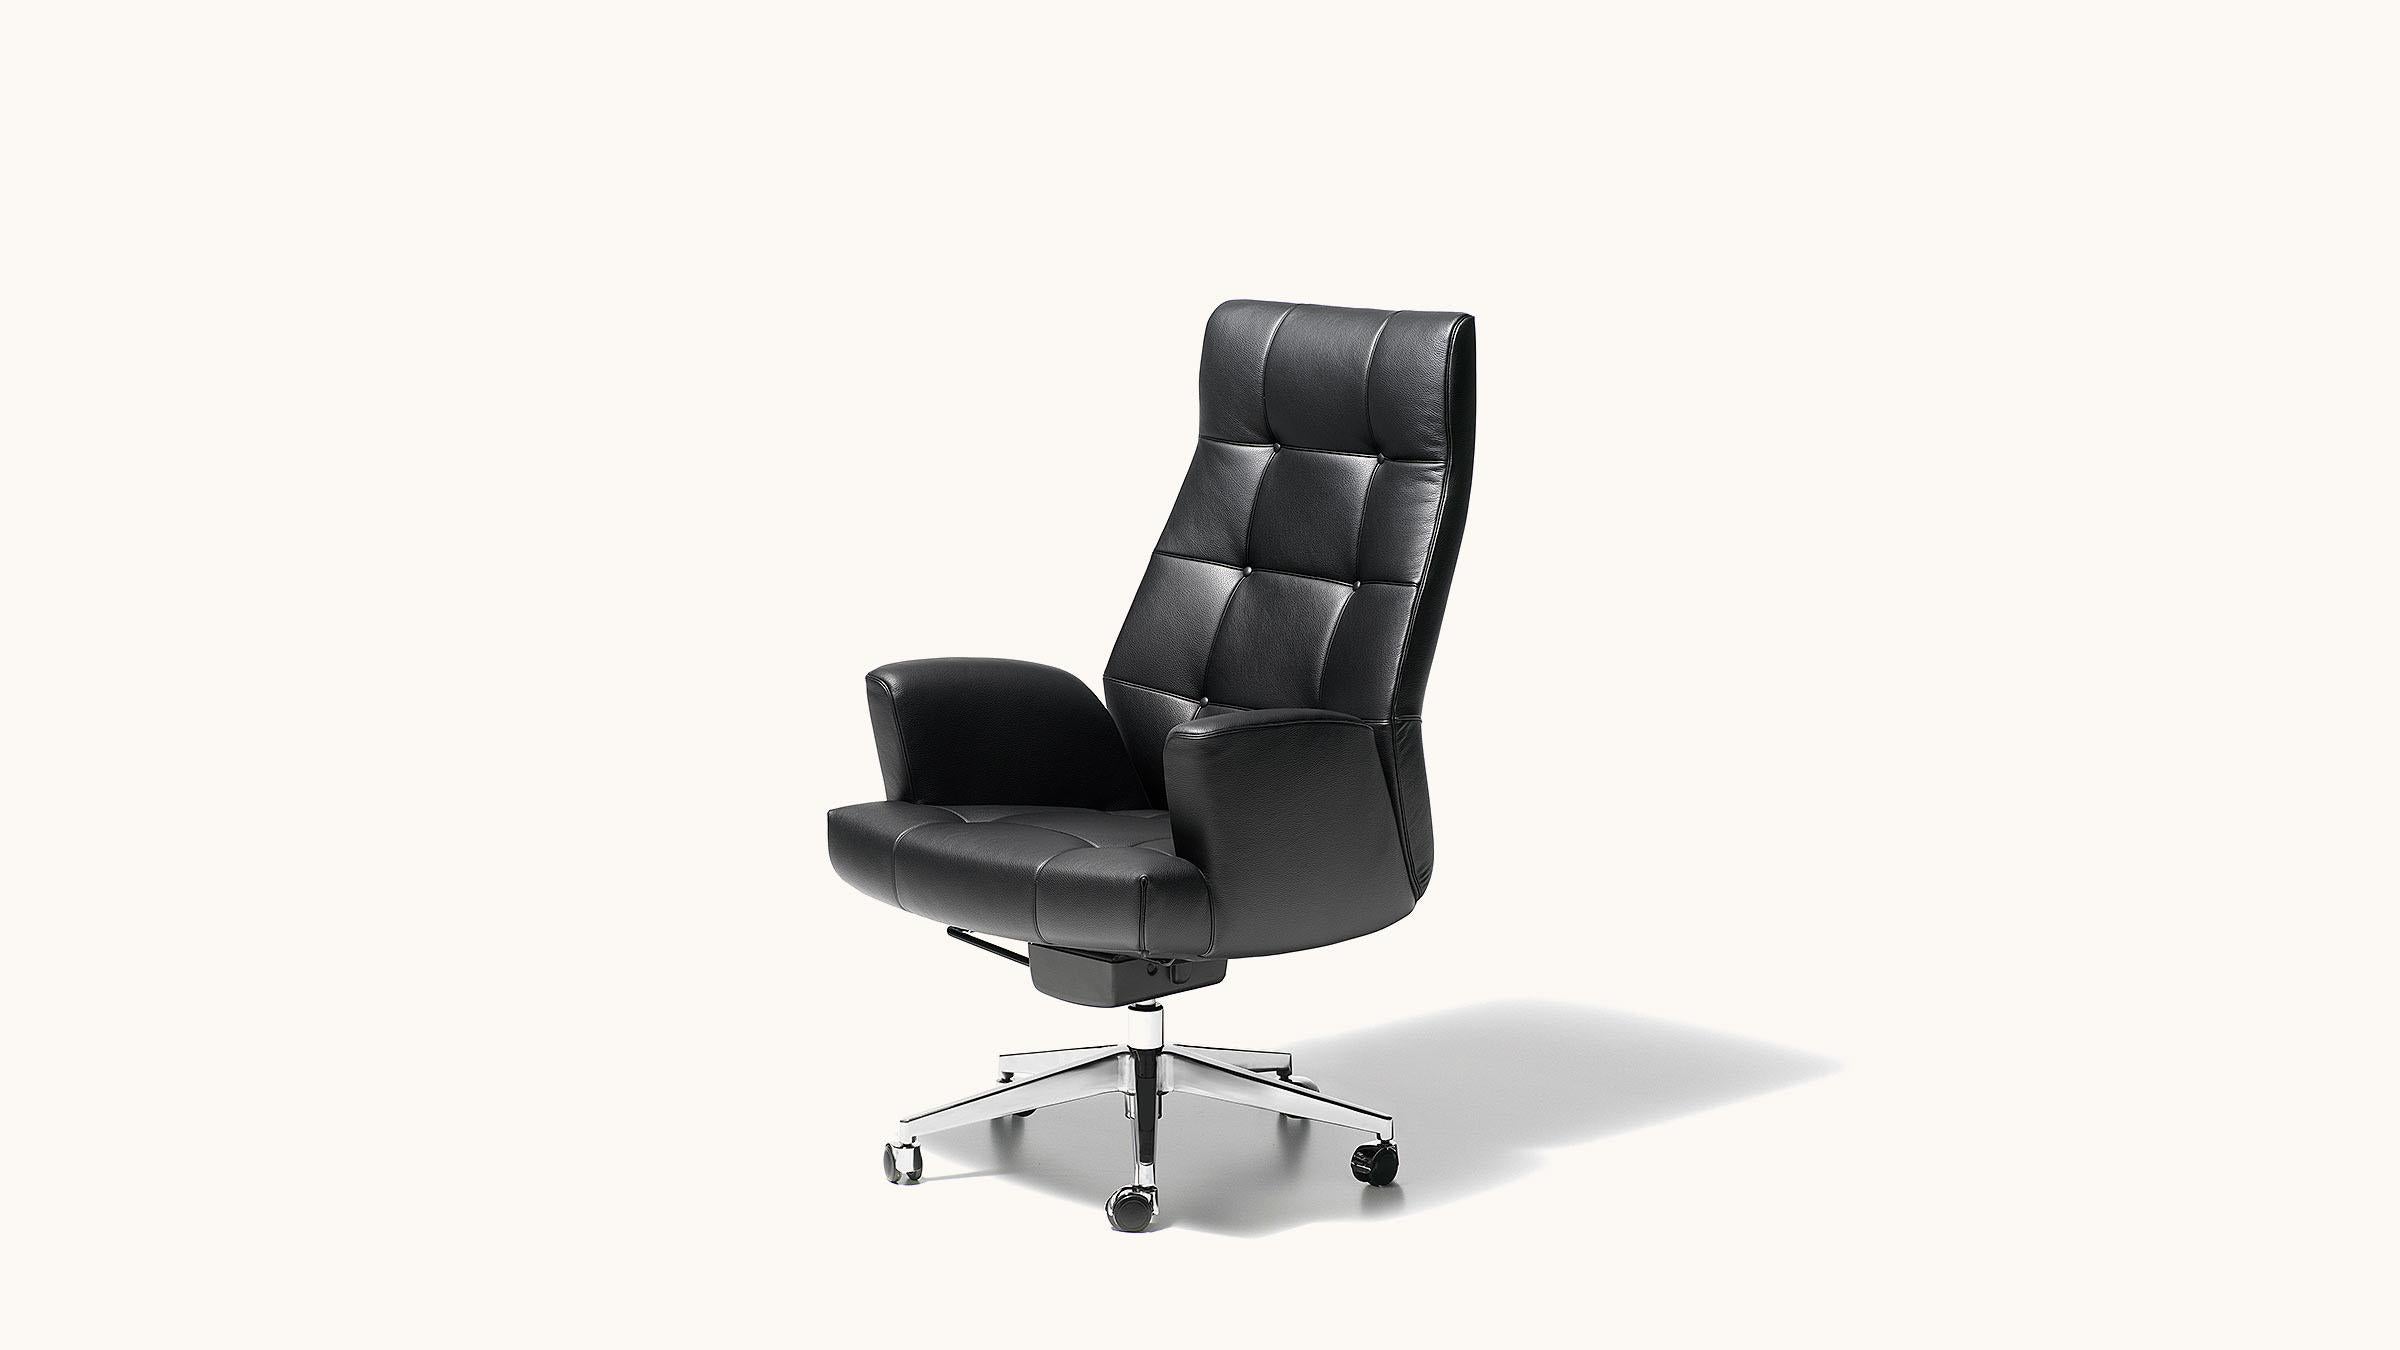 Sitting comfortably is the name of the game here! Designed as a Classic executive chair, the DS-257 is the perfect choice for concentrated and at the same time comfortable work, made for everyone with high demands during office work. Special care is